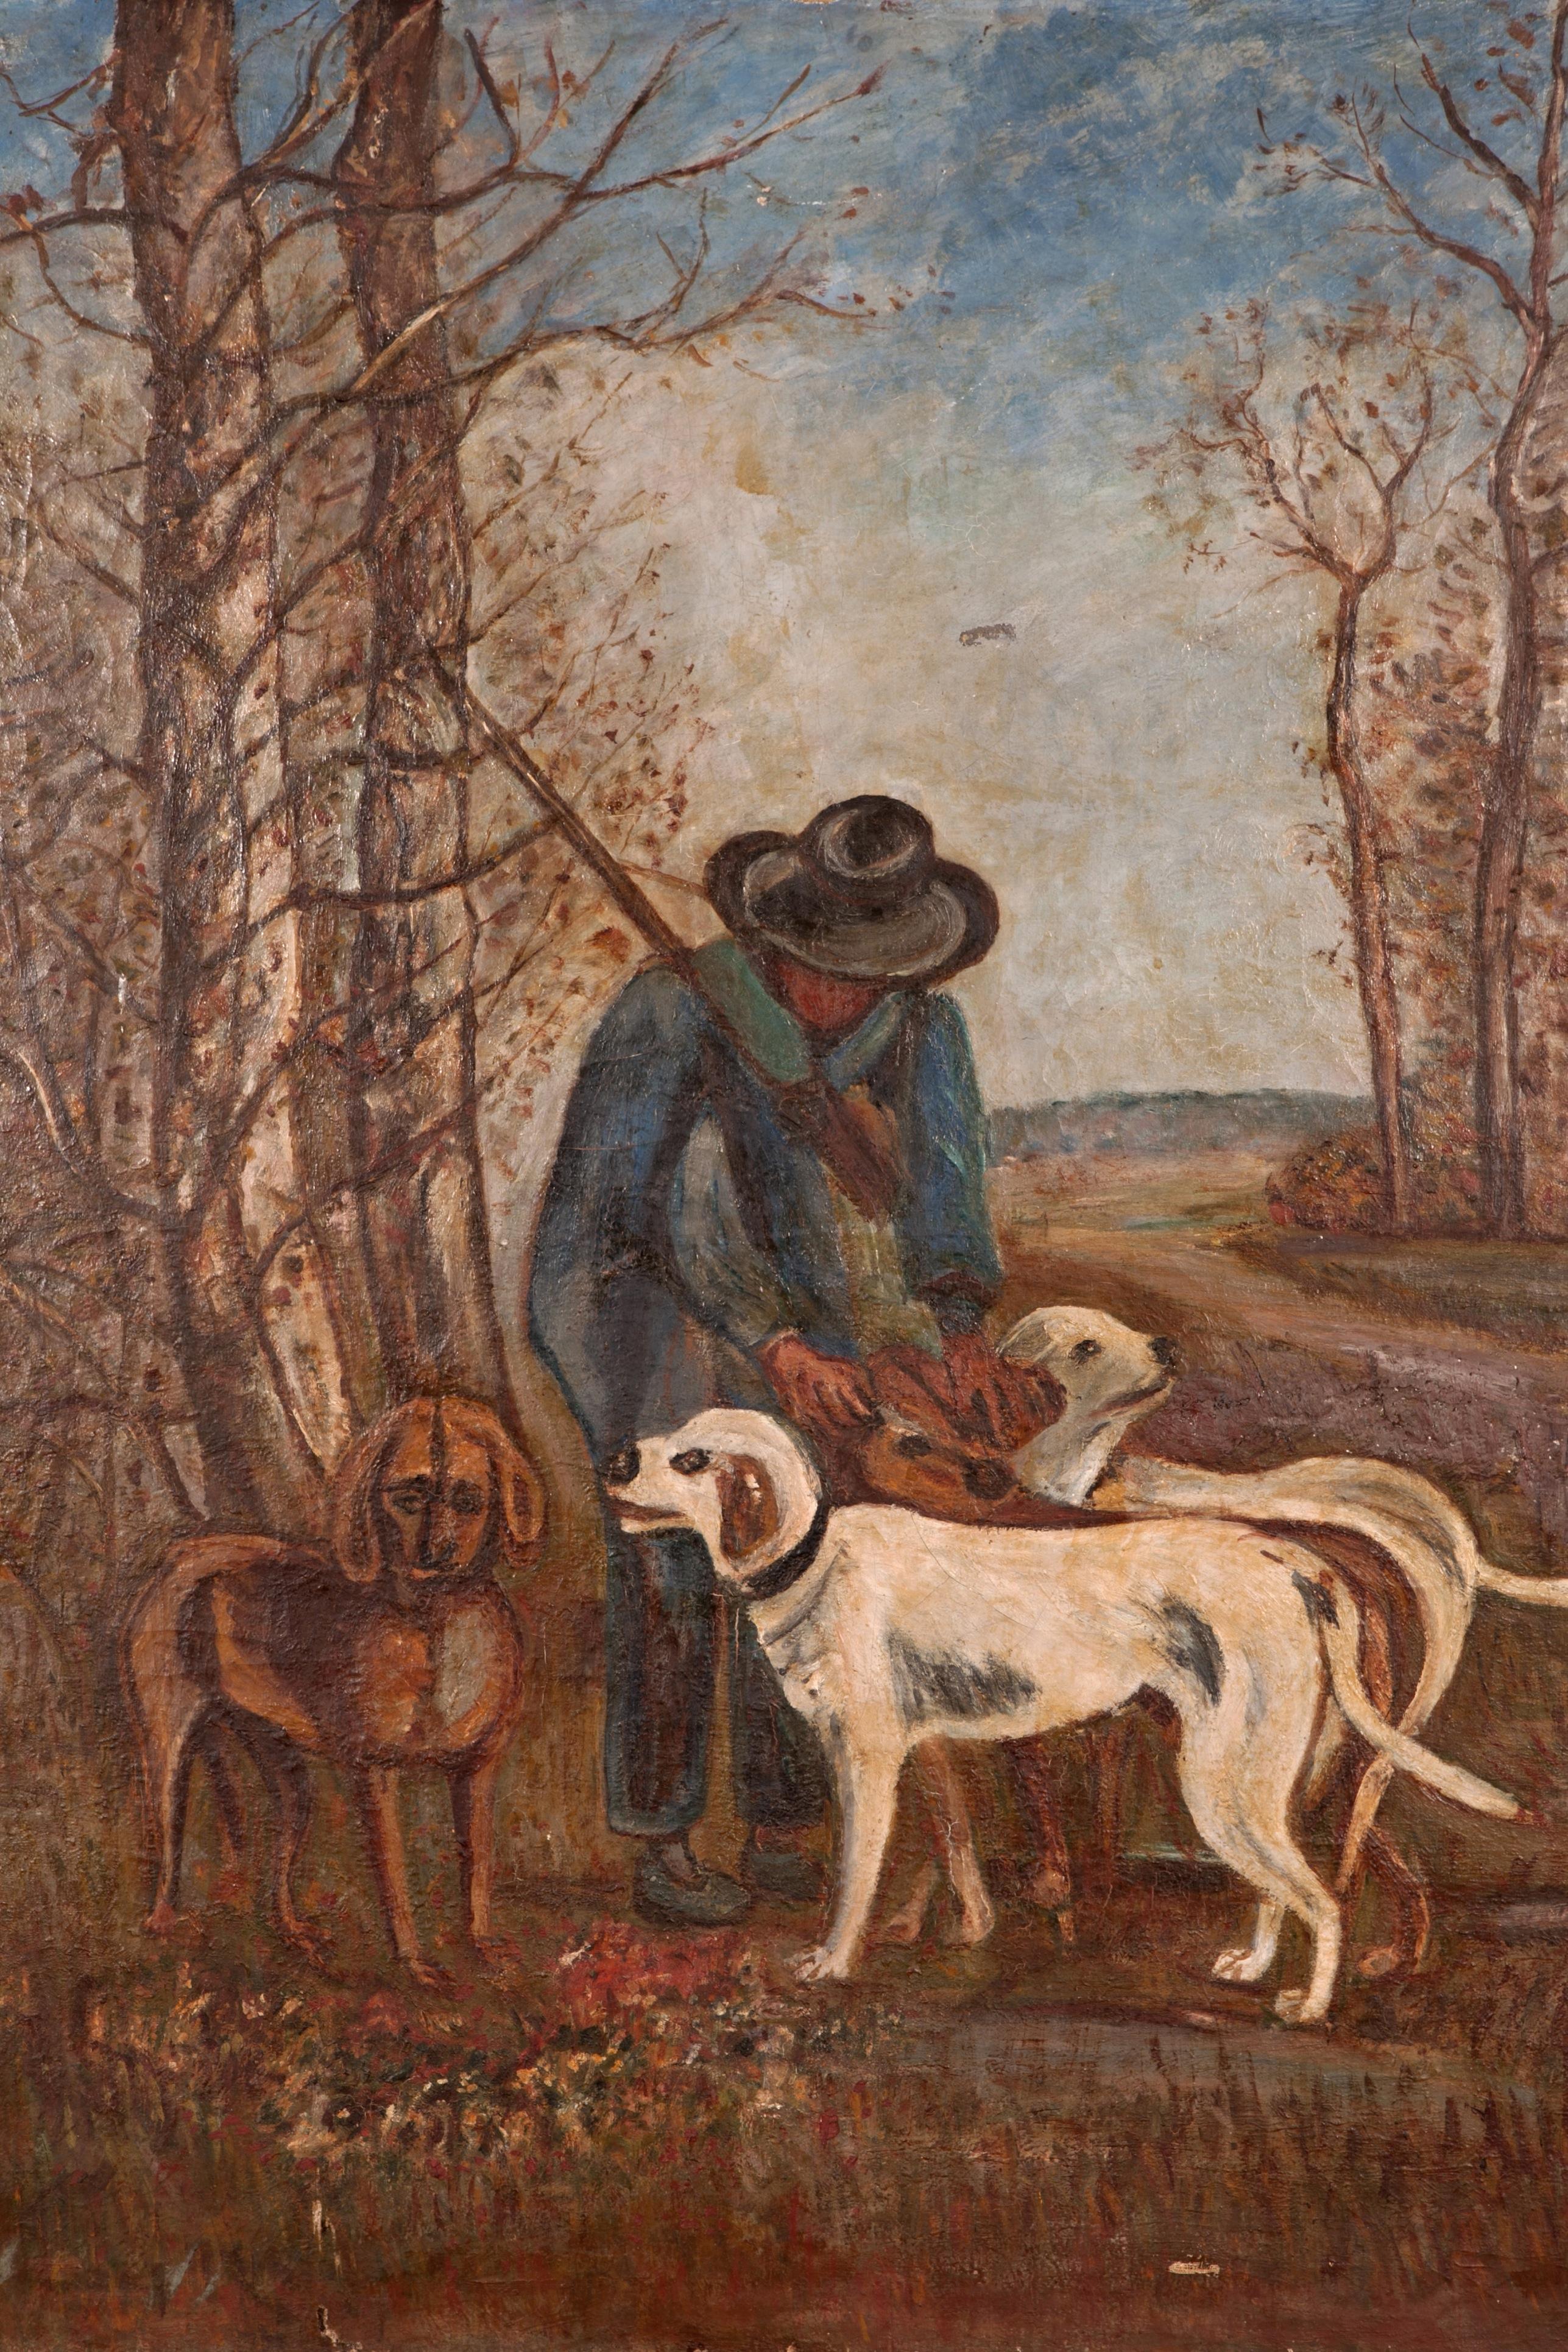 This is a large, incredible French painting of a hunter and his four dogs on a winter's day. Found in the south of France this is an extraordinary early 20th century antique piece. The artist chose to add details to the four faces of the dogs while